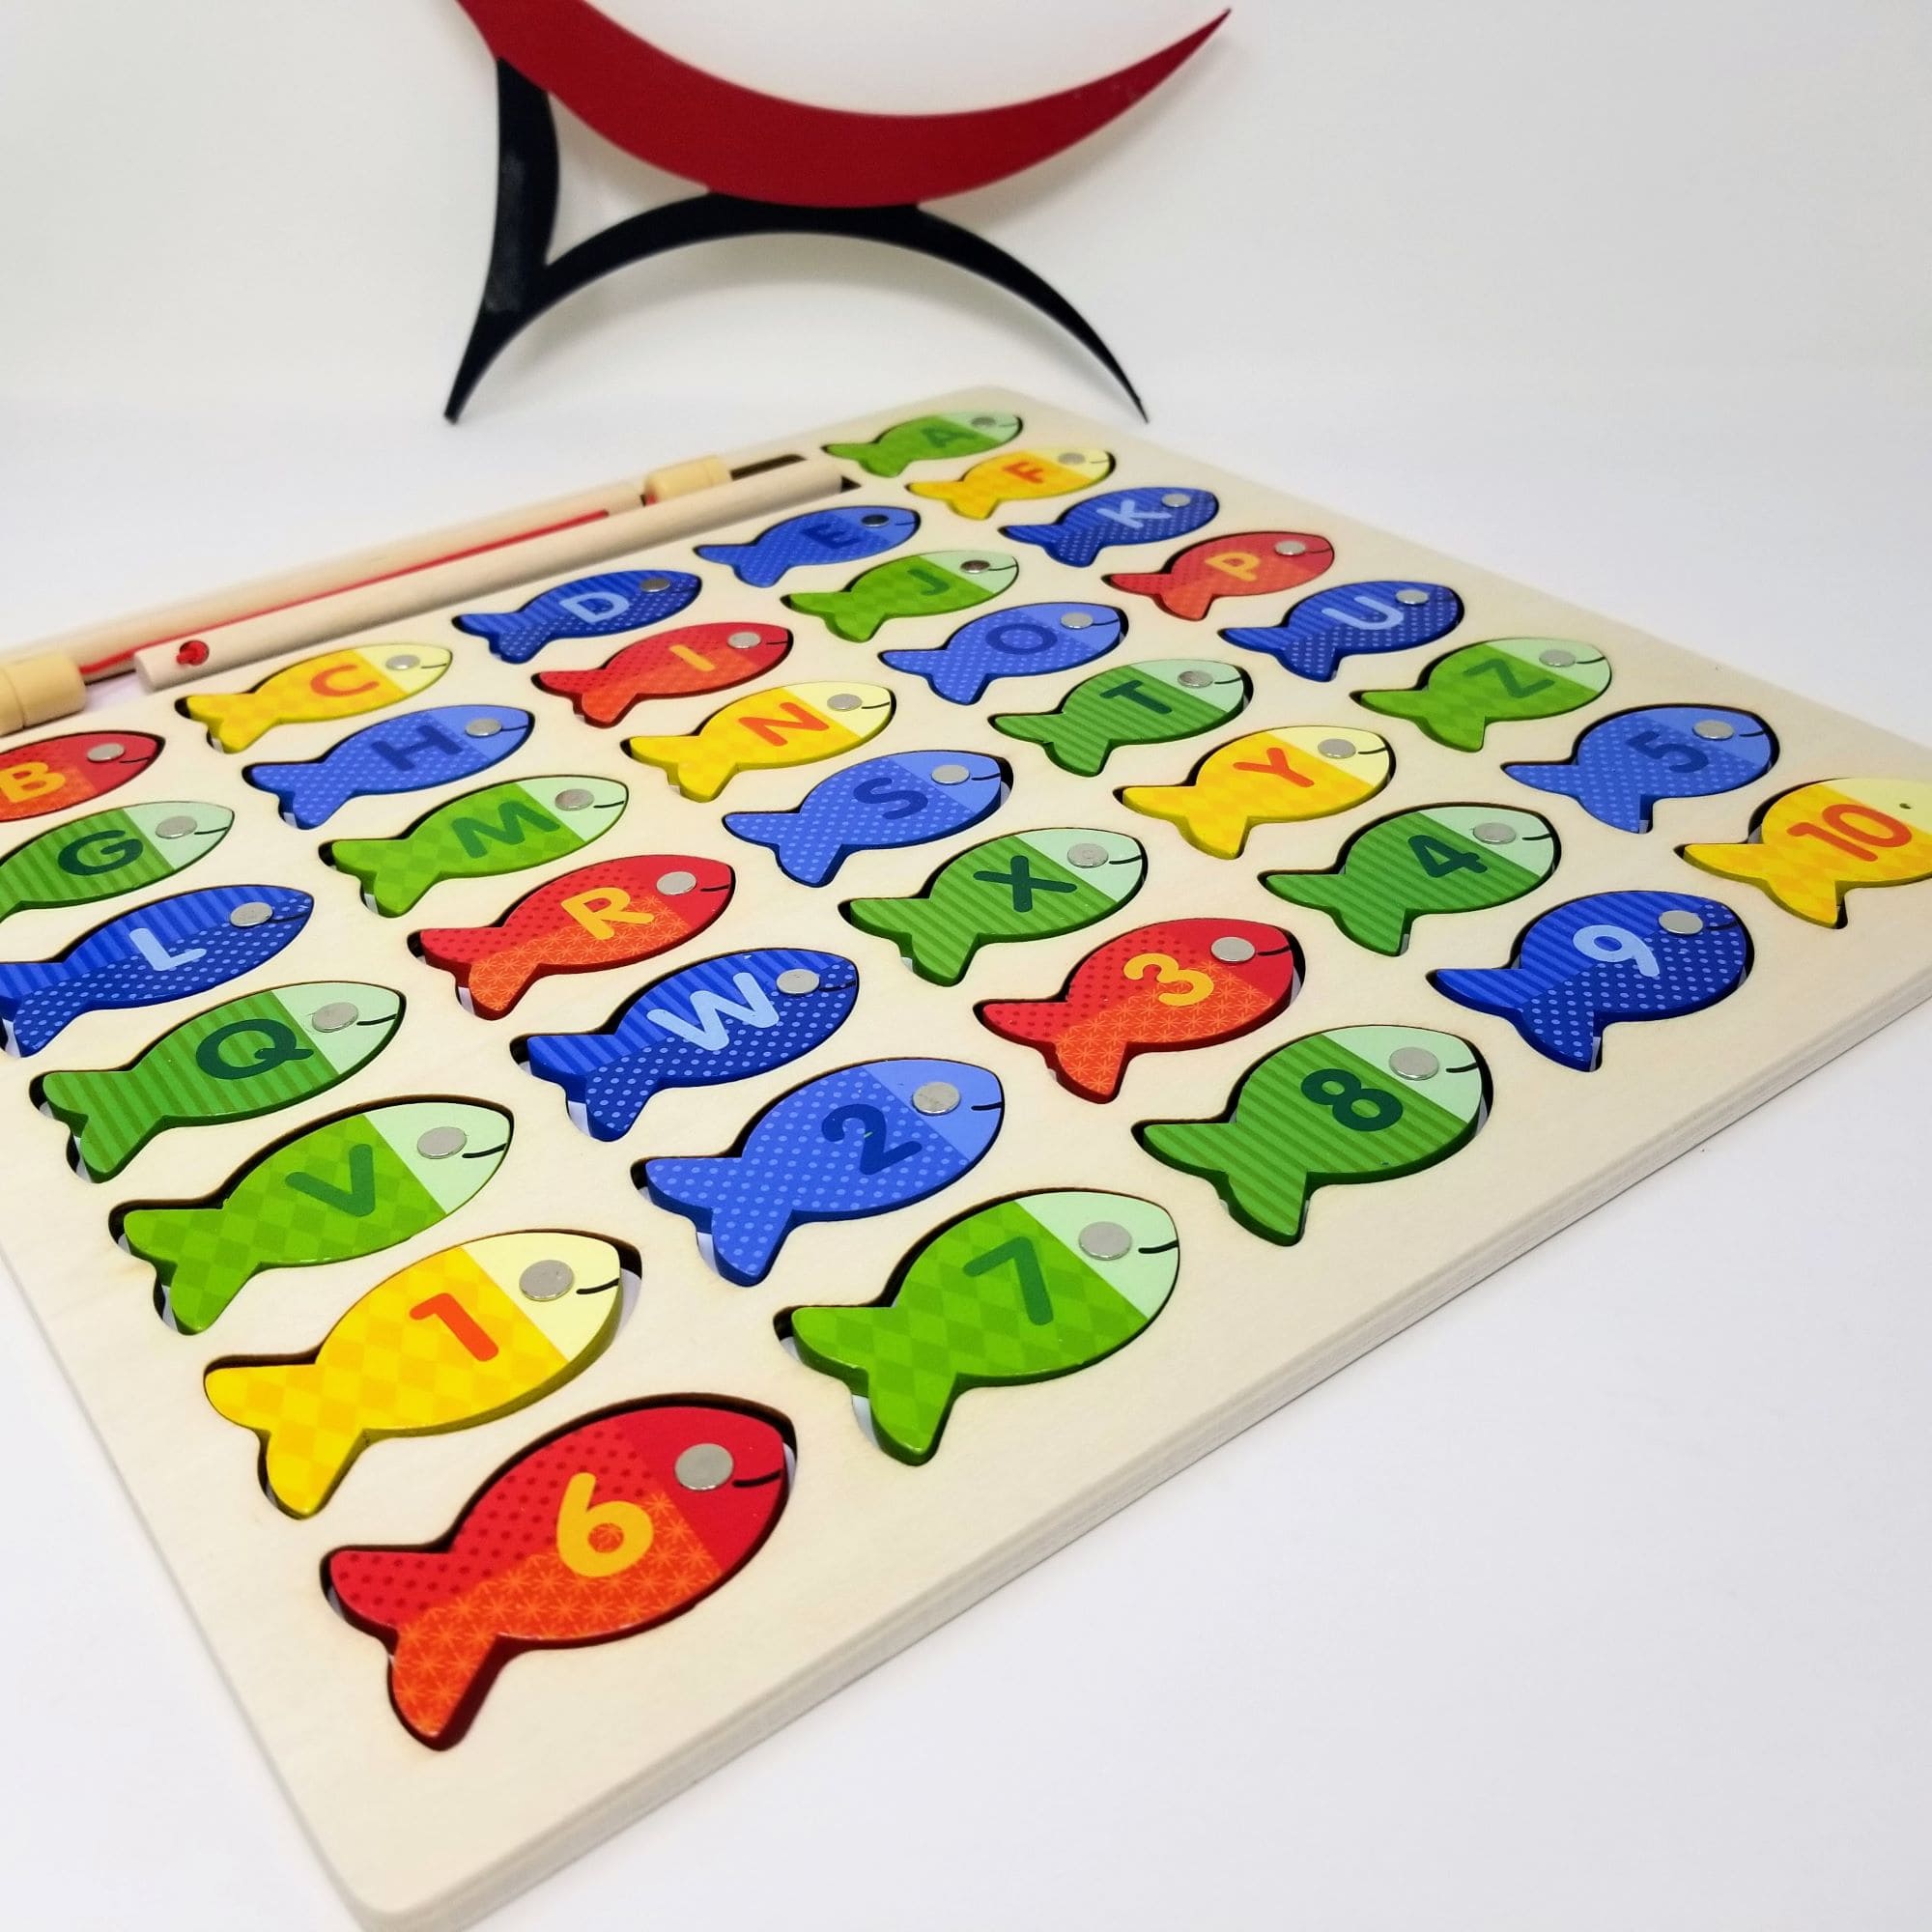 Magnetic Fish Catching Game: A Montessori-inspired Wooden Toy for Toddlers